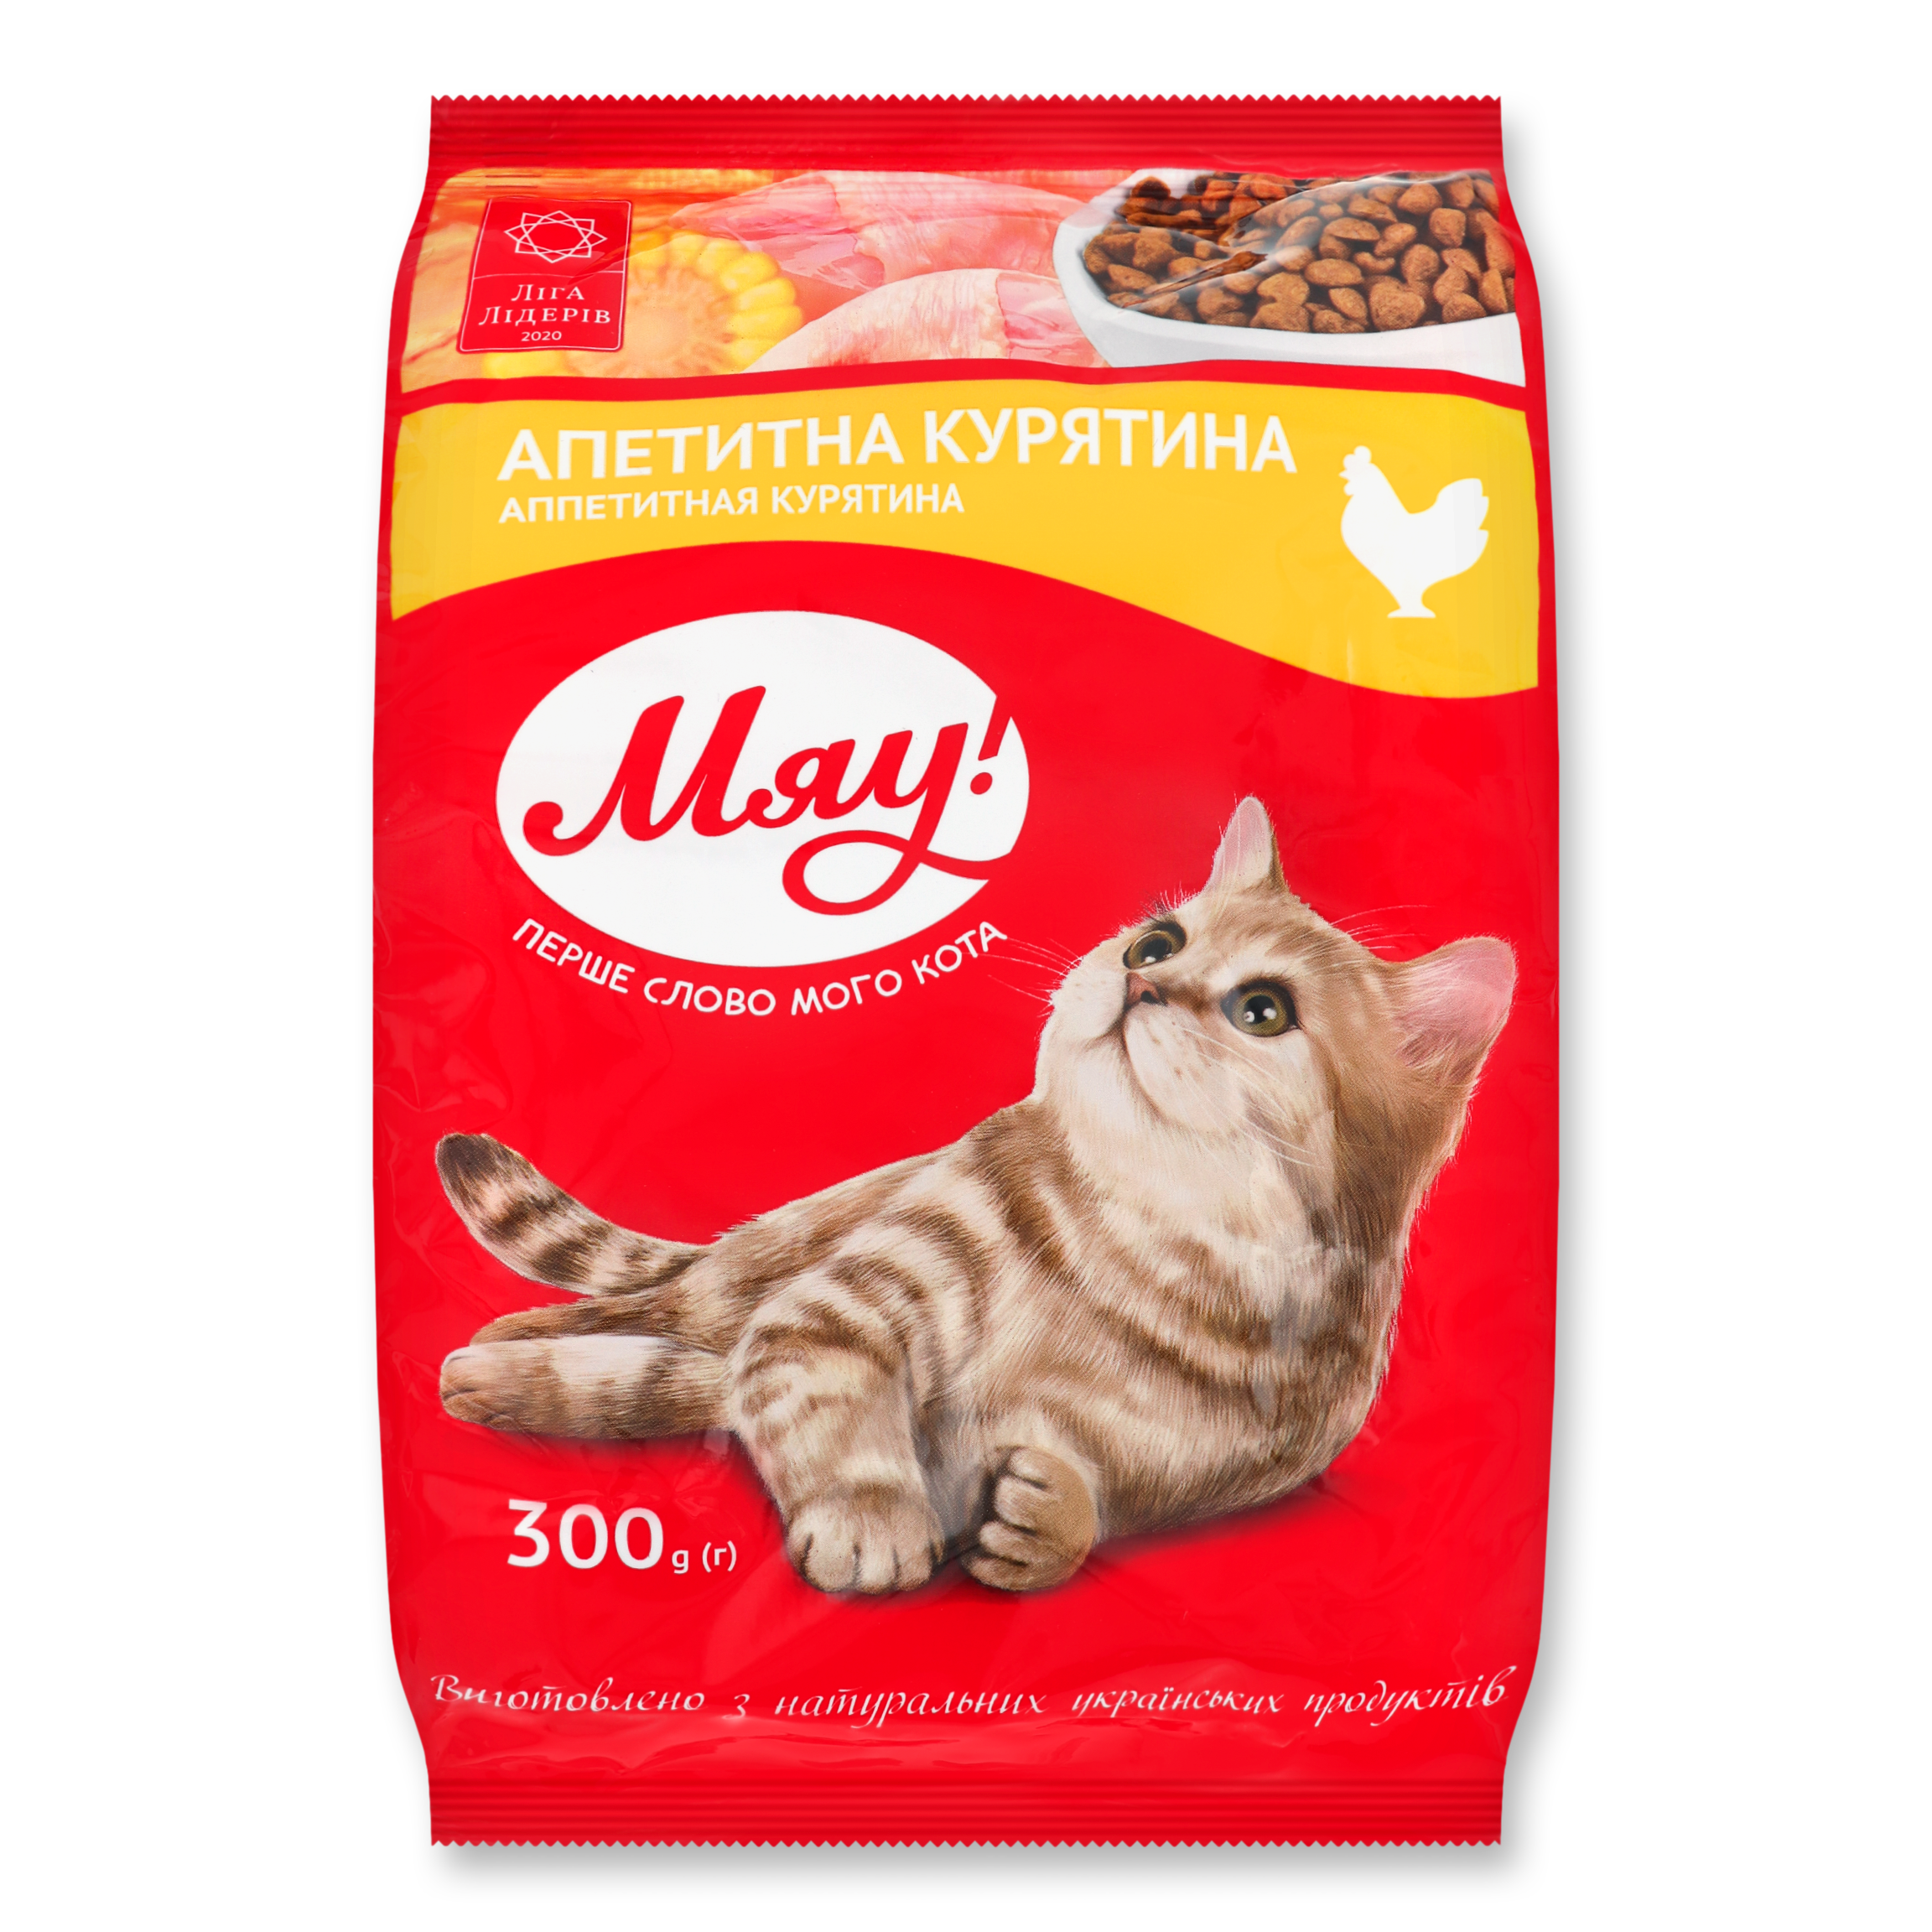 May! with Chicken Flavor Cat's Food 300g